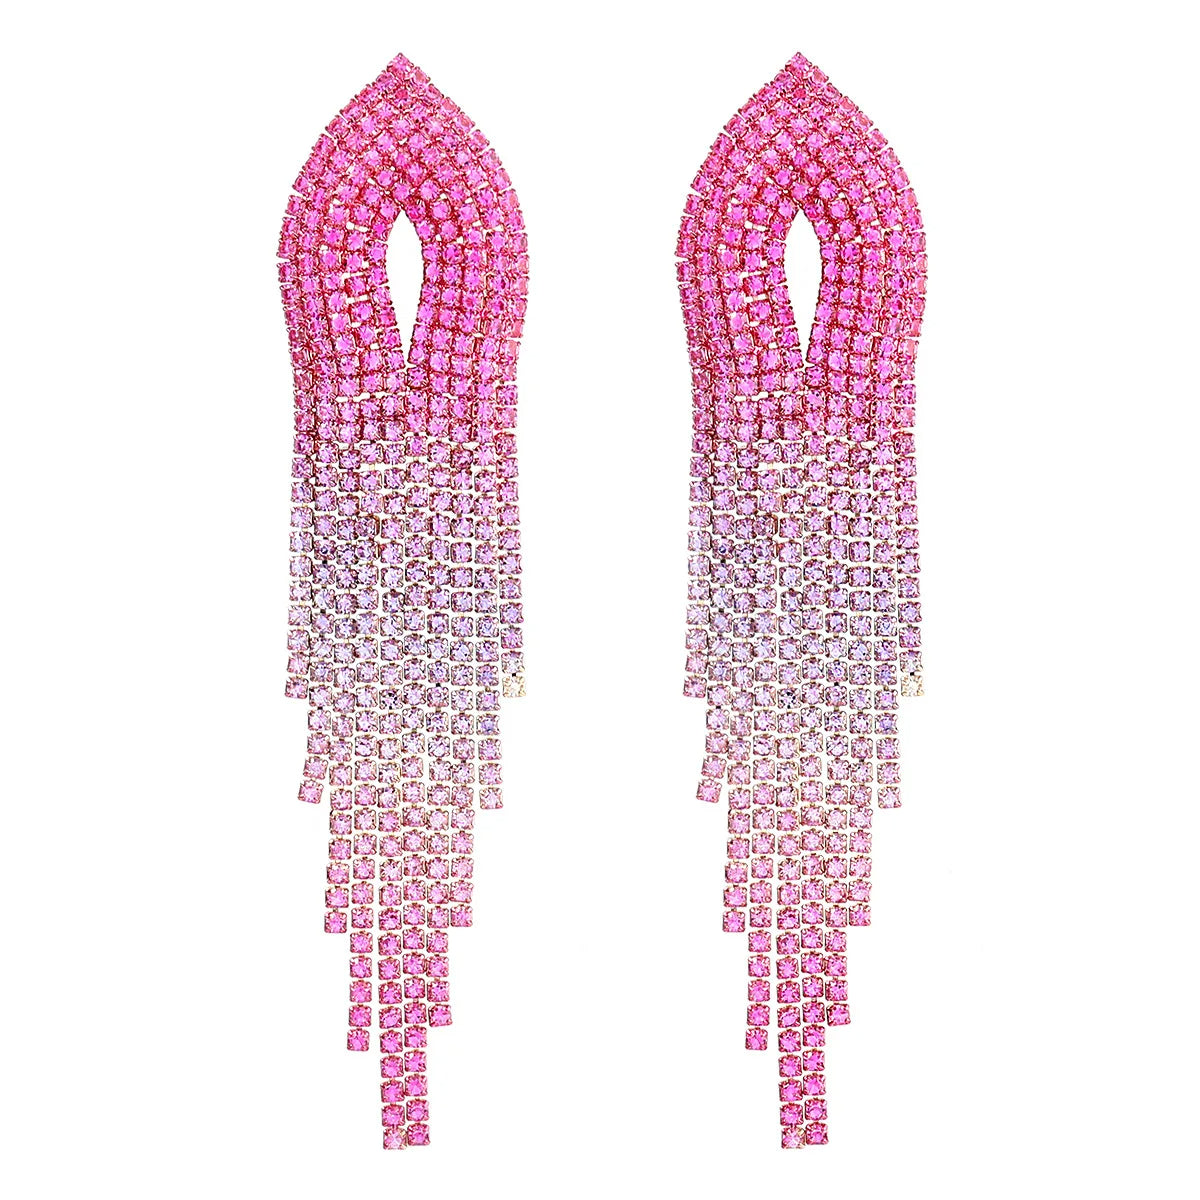 A pair of women's pink diamond long earrings made of crystal and rhinestone